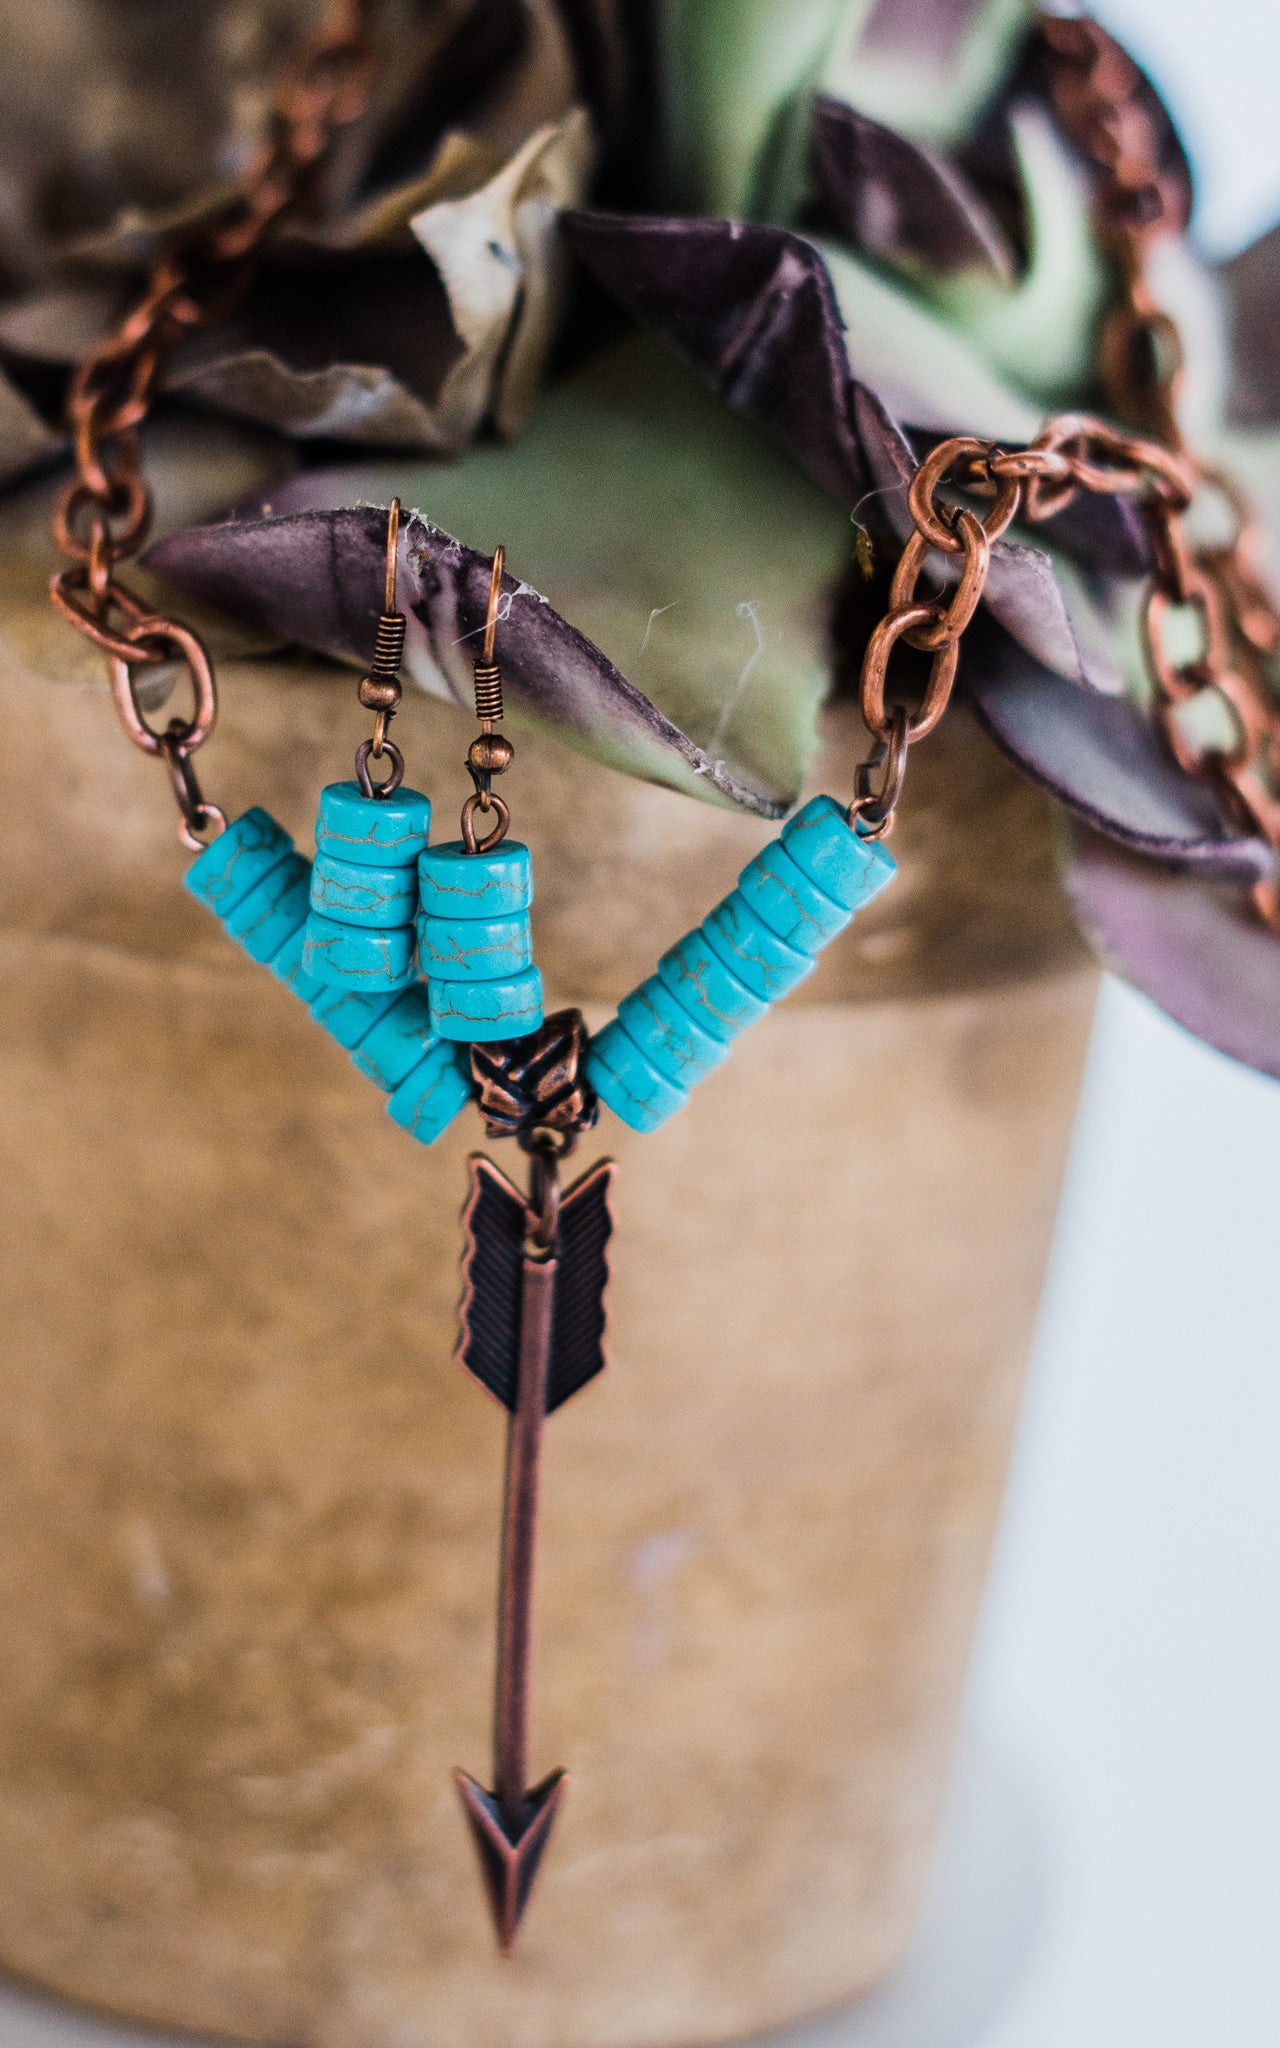 Faux Turquoise Necklace with Arrow Charm